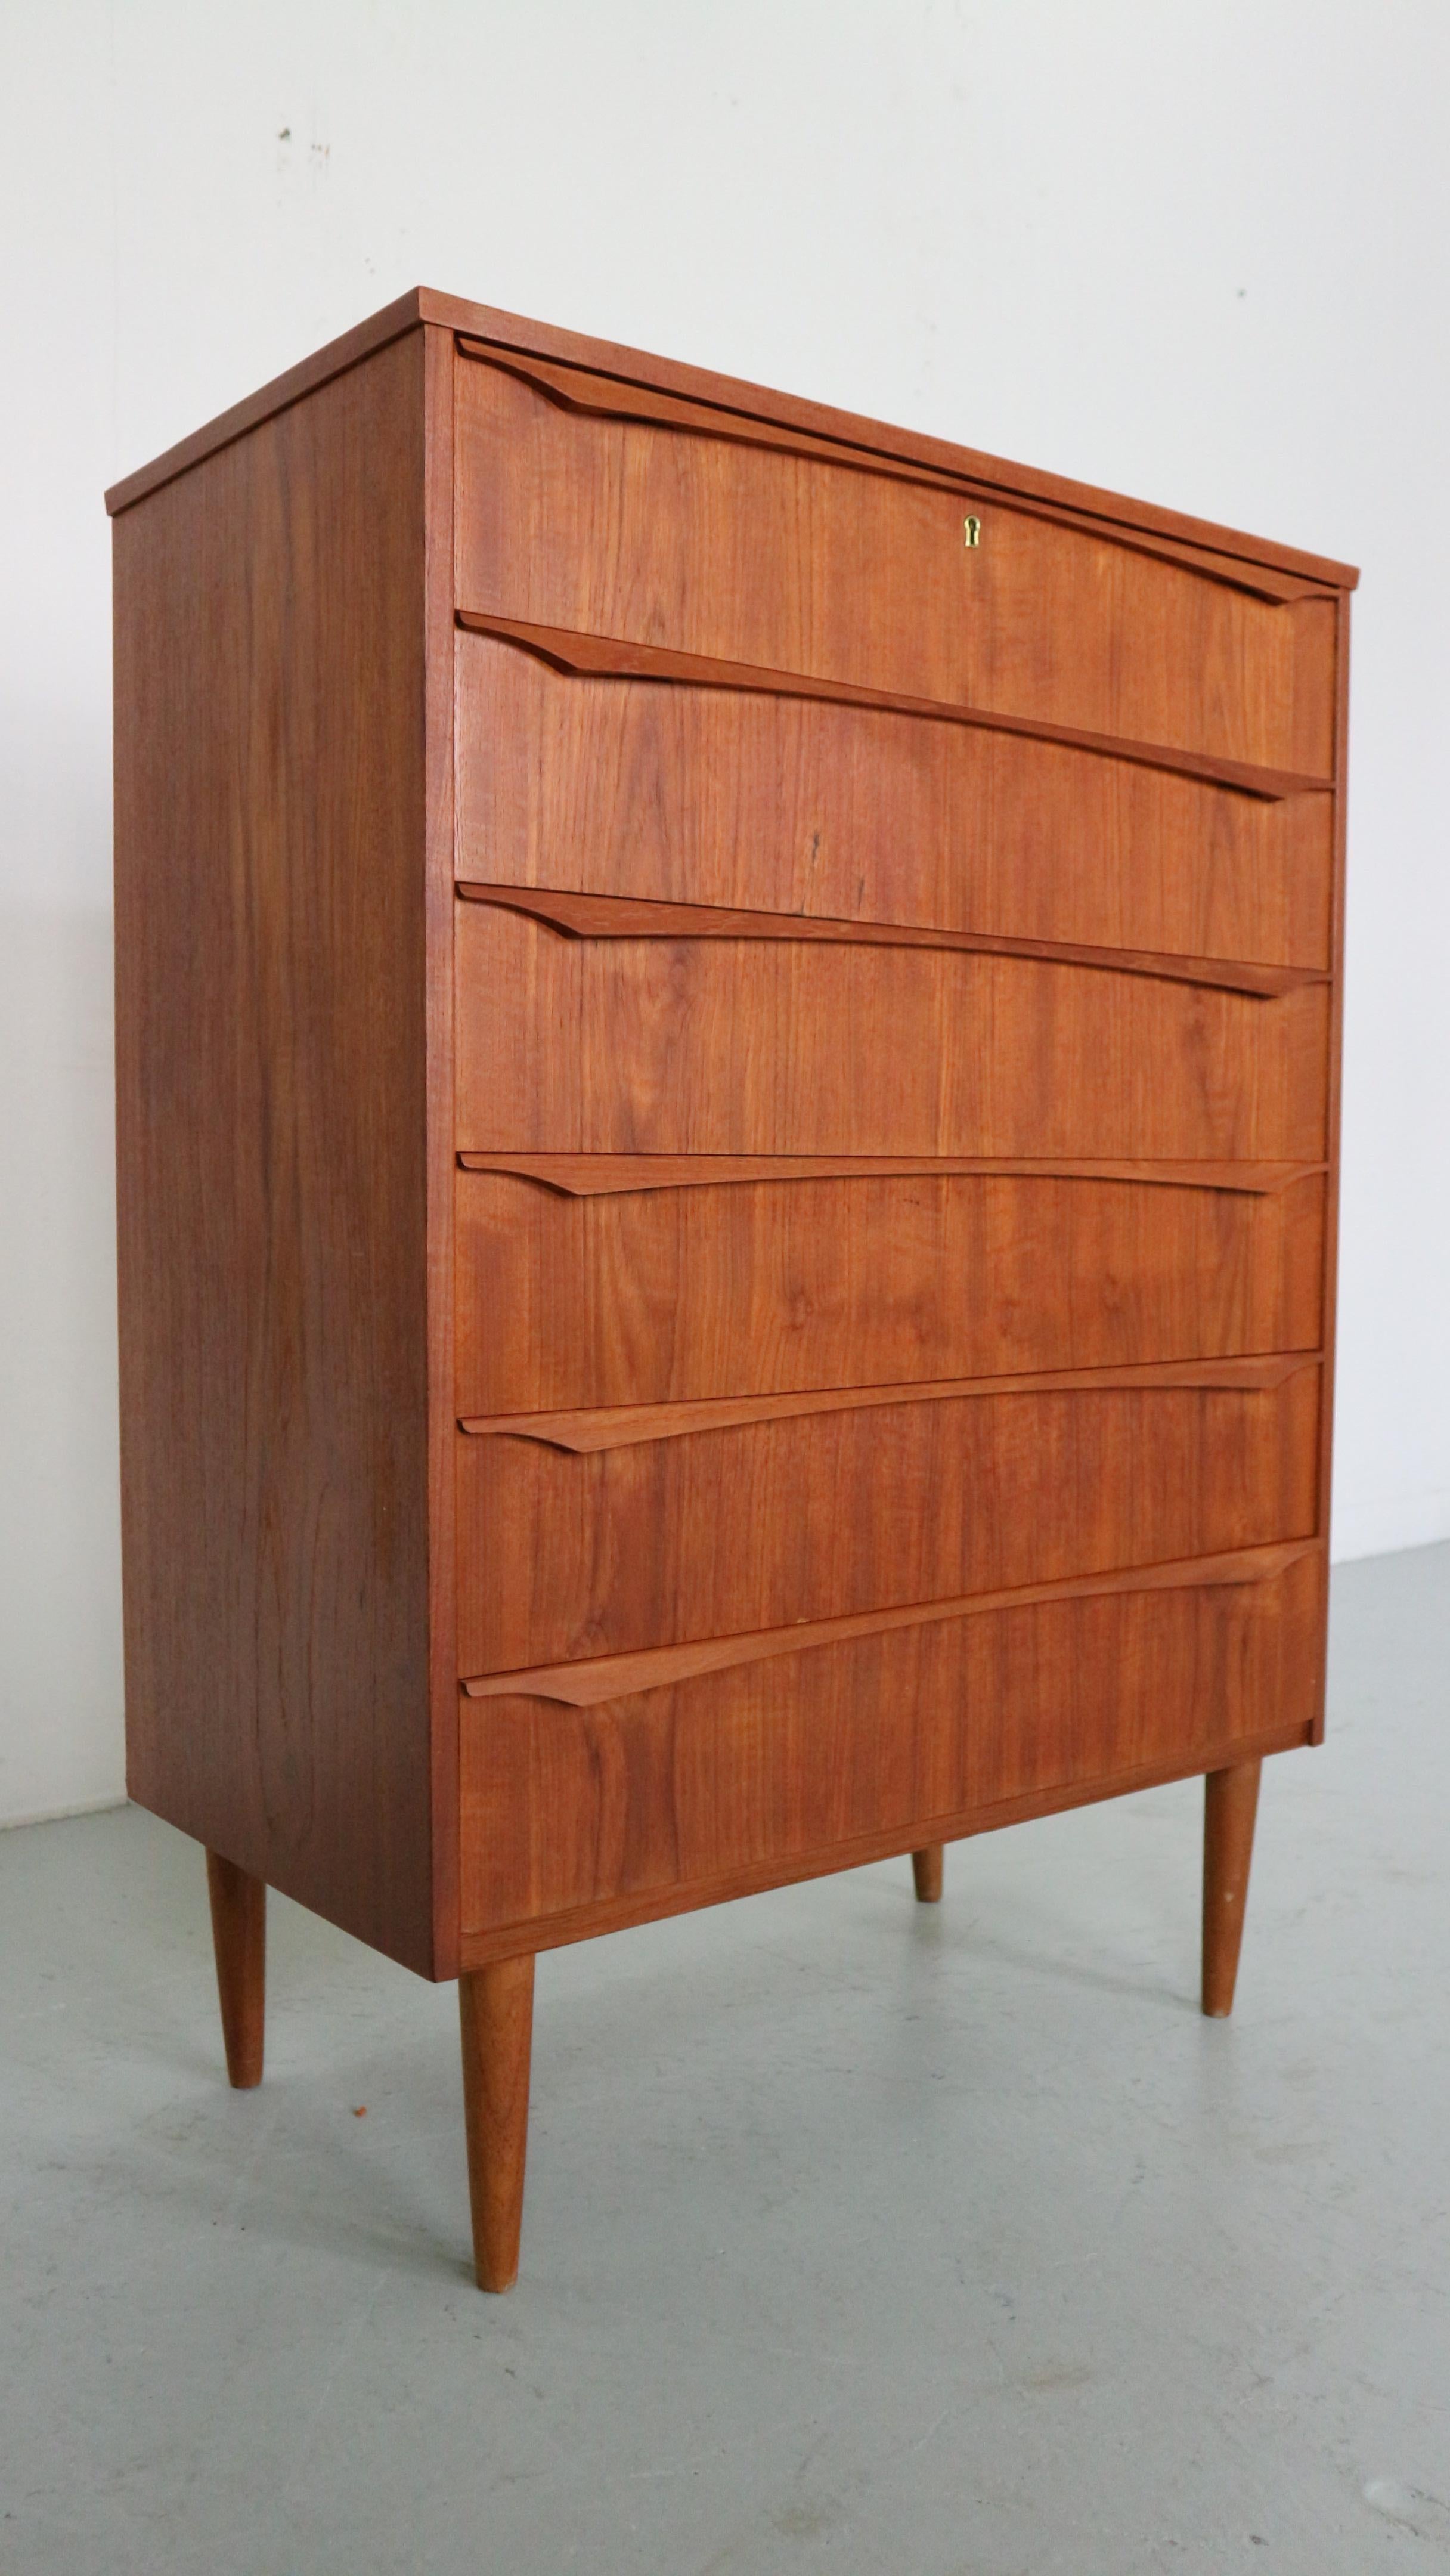 Mid- Century modern period chest of 6 drawers or tallboy cabinet made in 1960's Denmark.

Made of teak wood veneer. Elegant handles and good working drawers.
High quality Danish furniture.

The cabinet is in a good vintage condition.
It has been